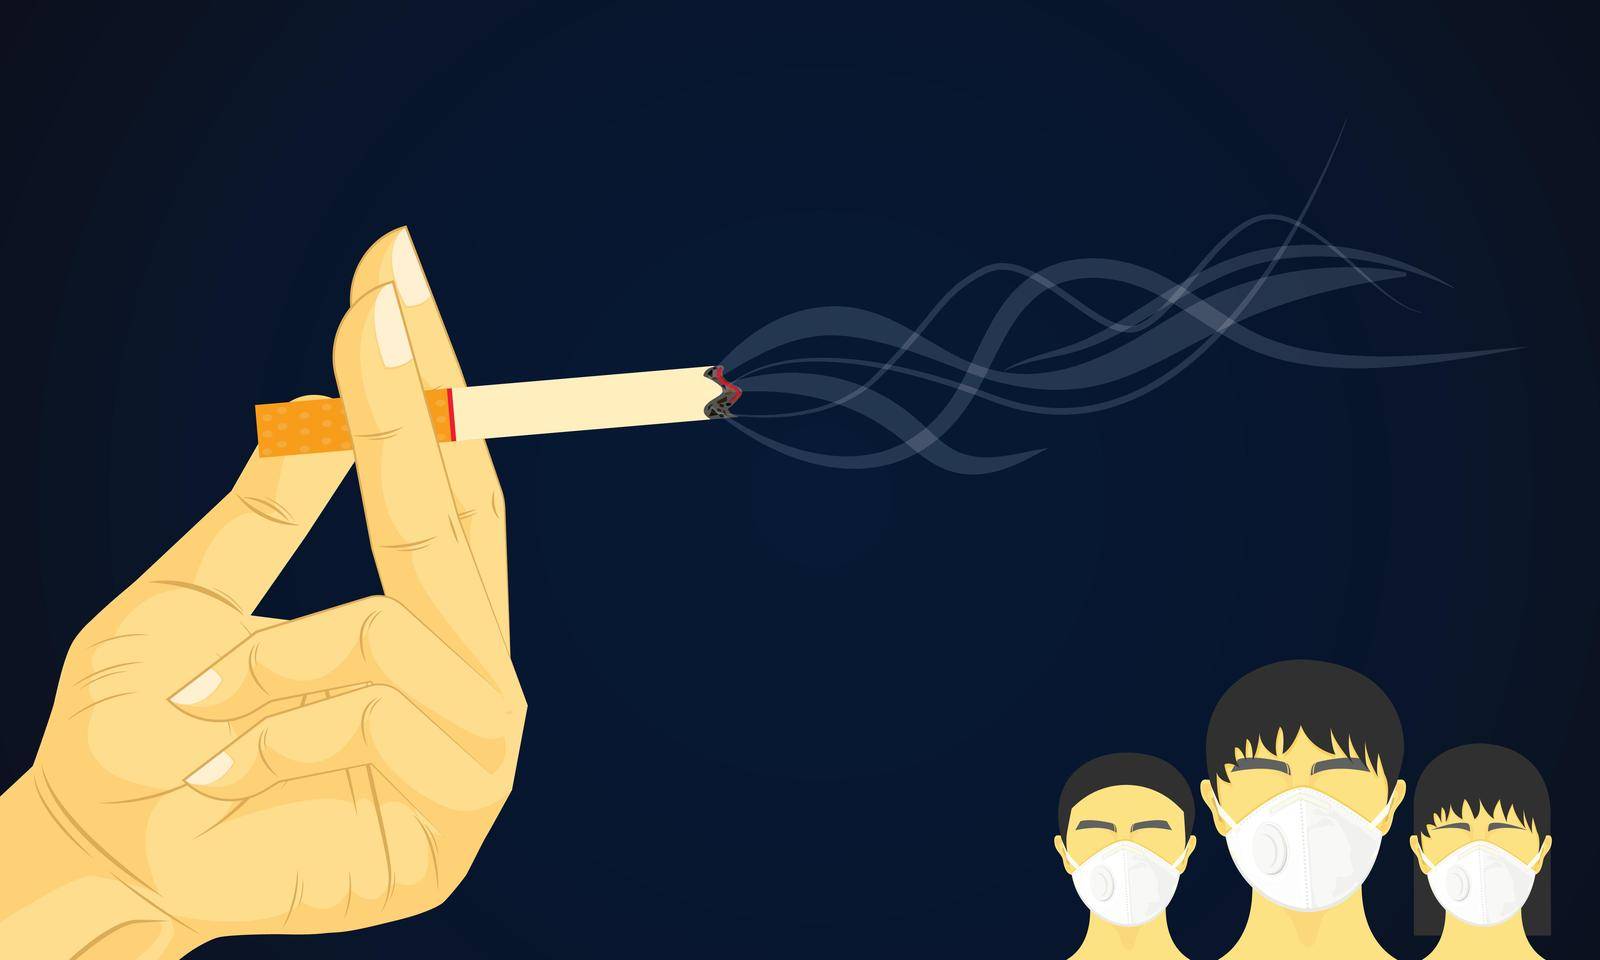 hand holding cigarette smoke floating in the air. dangerous to health kid other people. vector illustration eps10